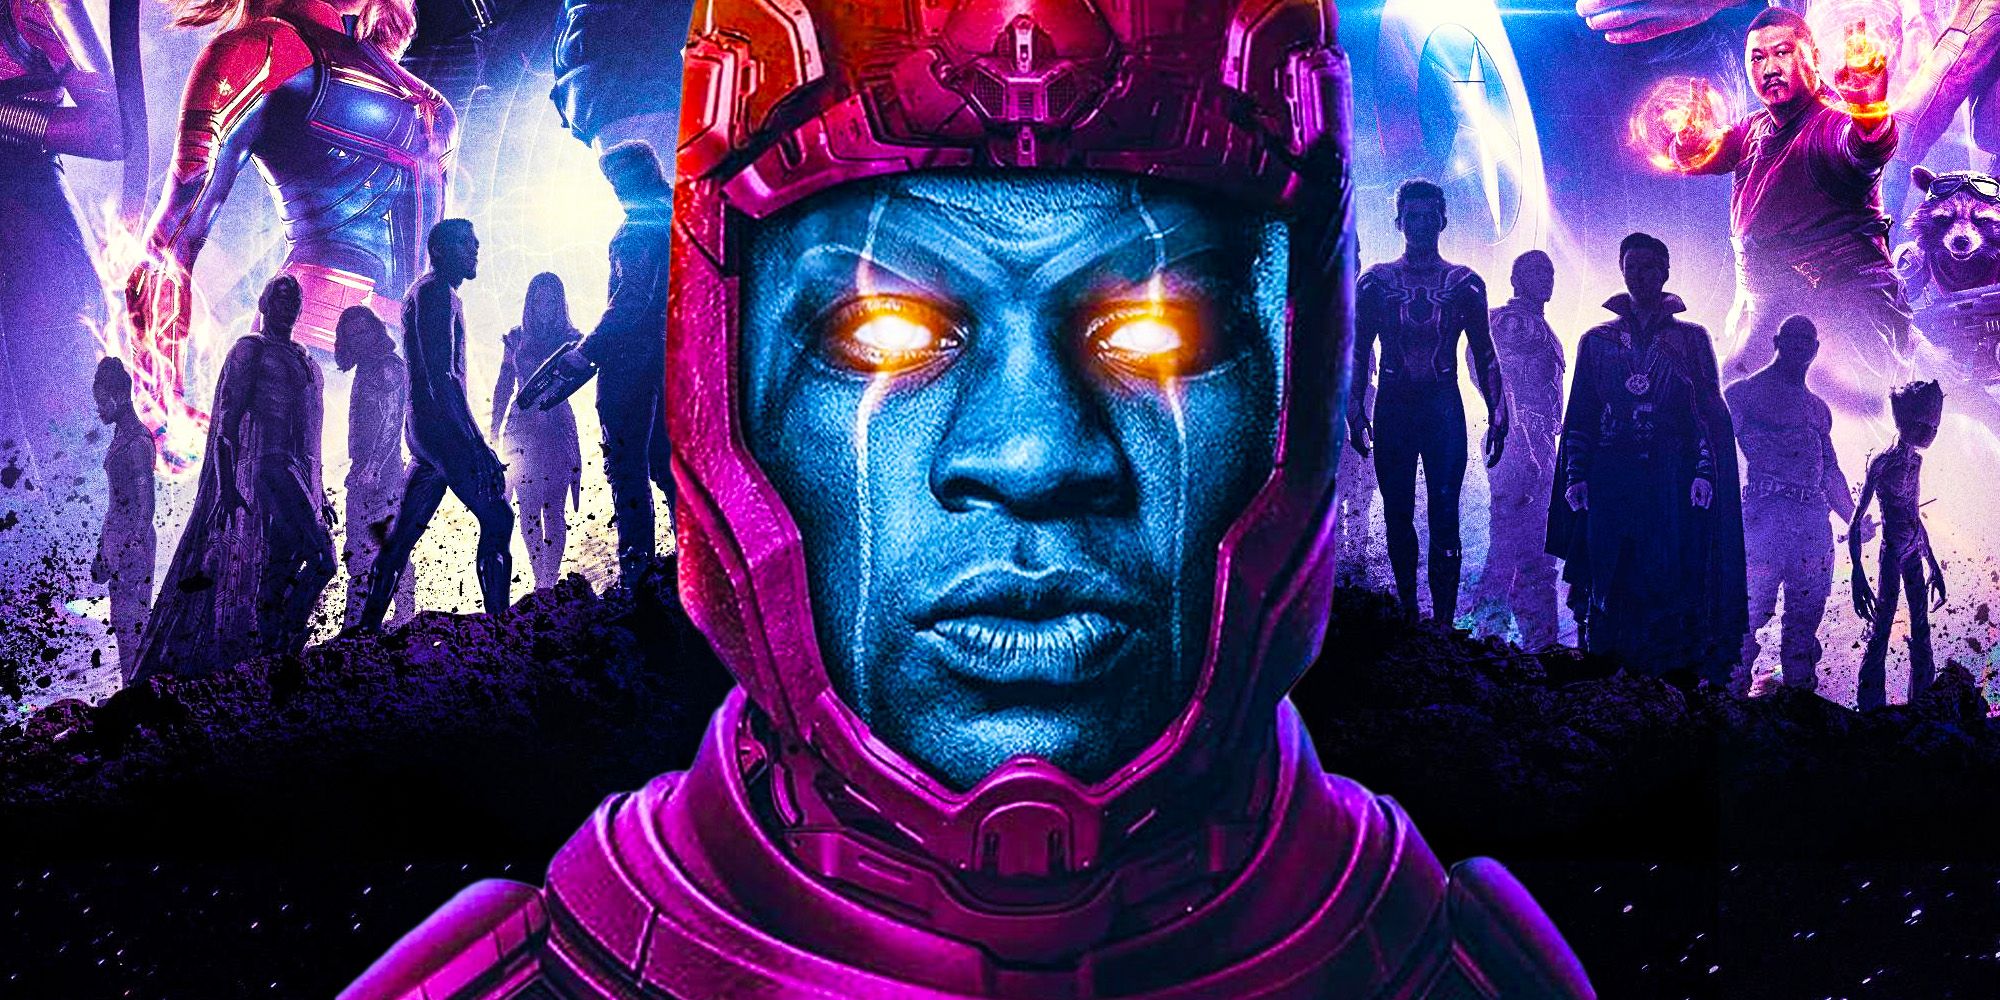 Jonathan Majors as Kang the Conqueror in front of the Avengers